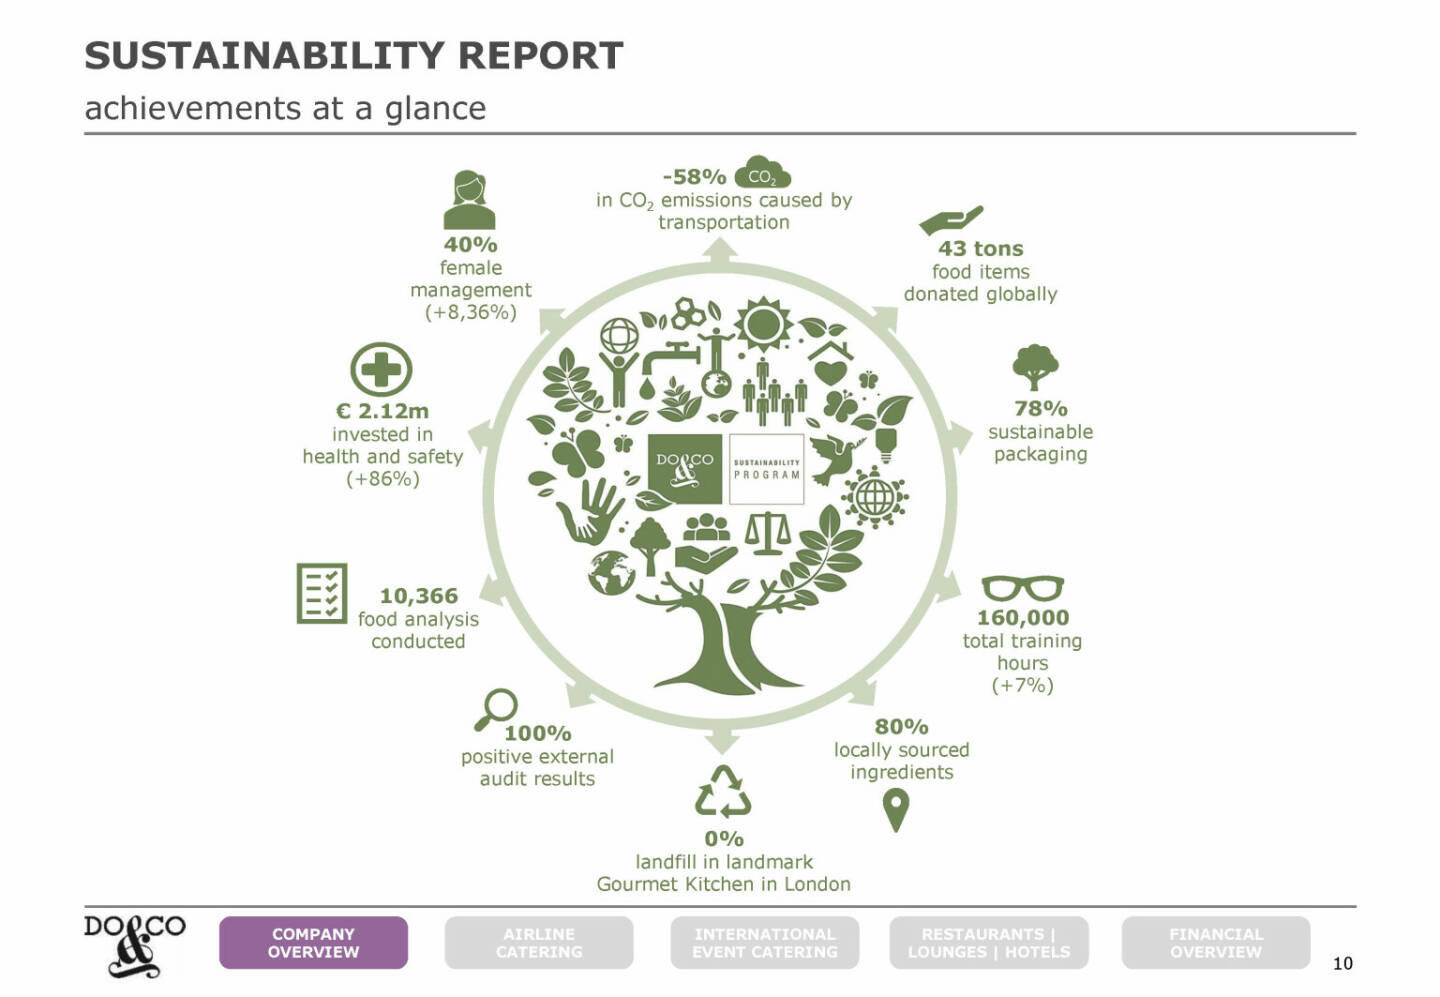 Do&Co - SUSTAINABILITY REPORT